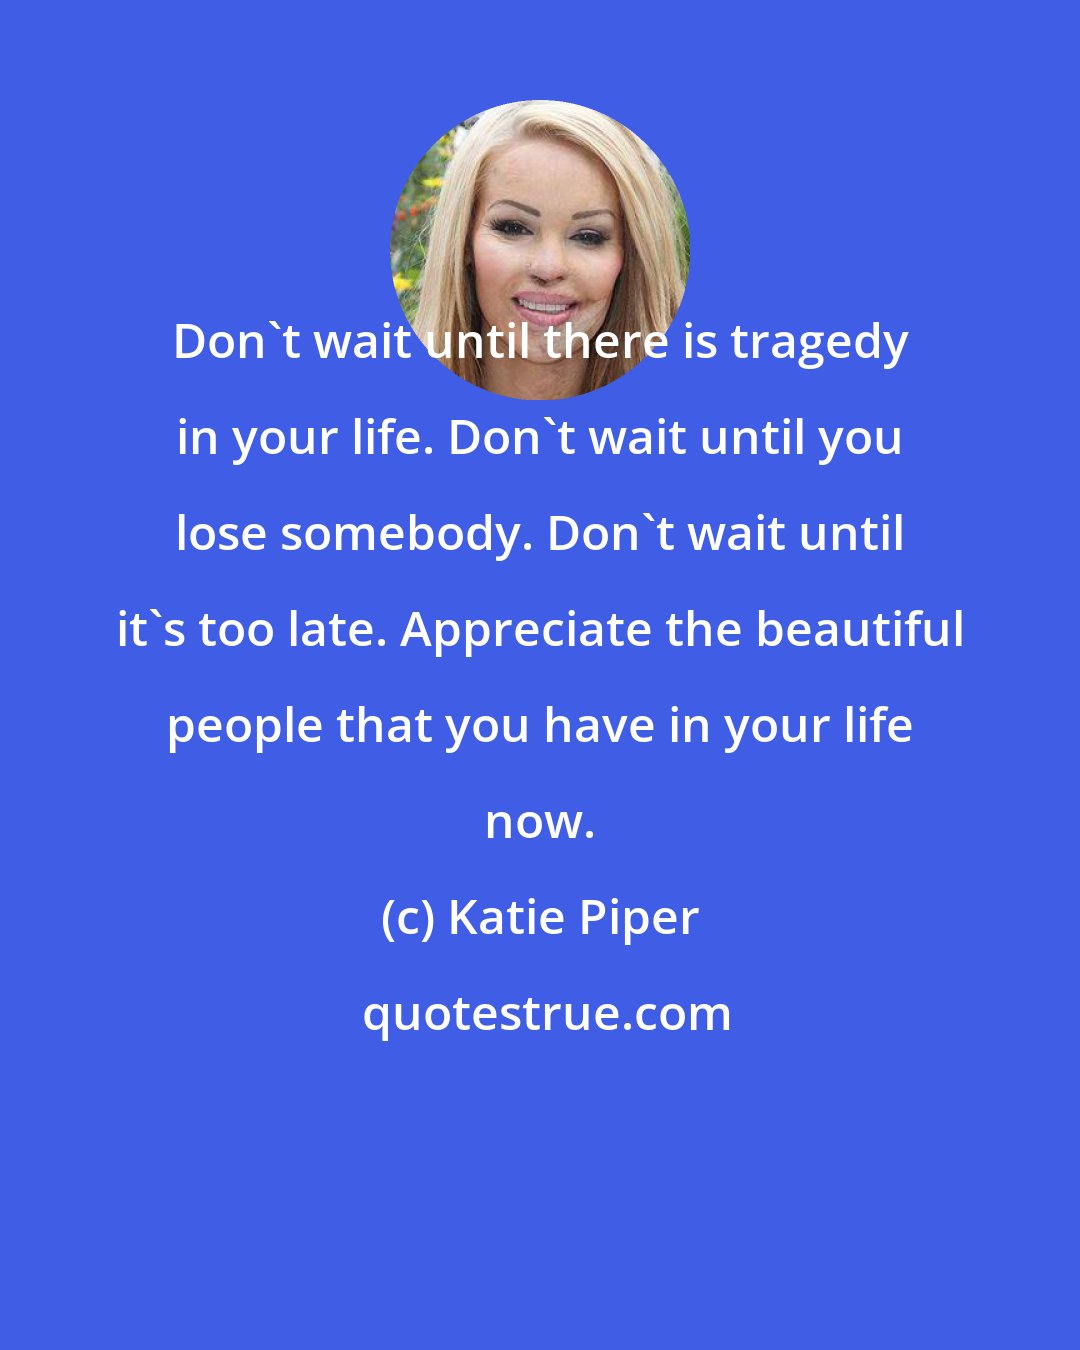 Katie Piper: Don't wait until there is tragedy in your life. Don't wait until you lose somebody. Don't wait until it's too late. Appreciate the beautiful people that you have in your life now.